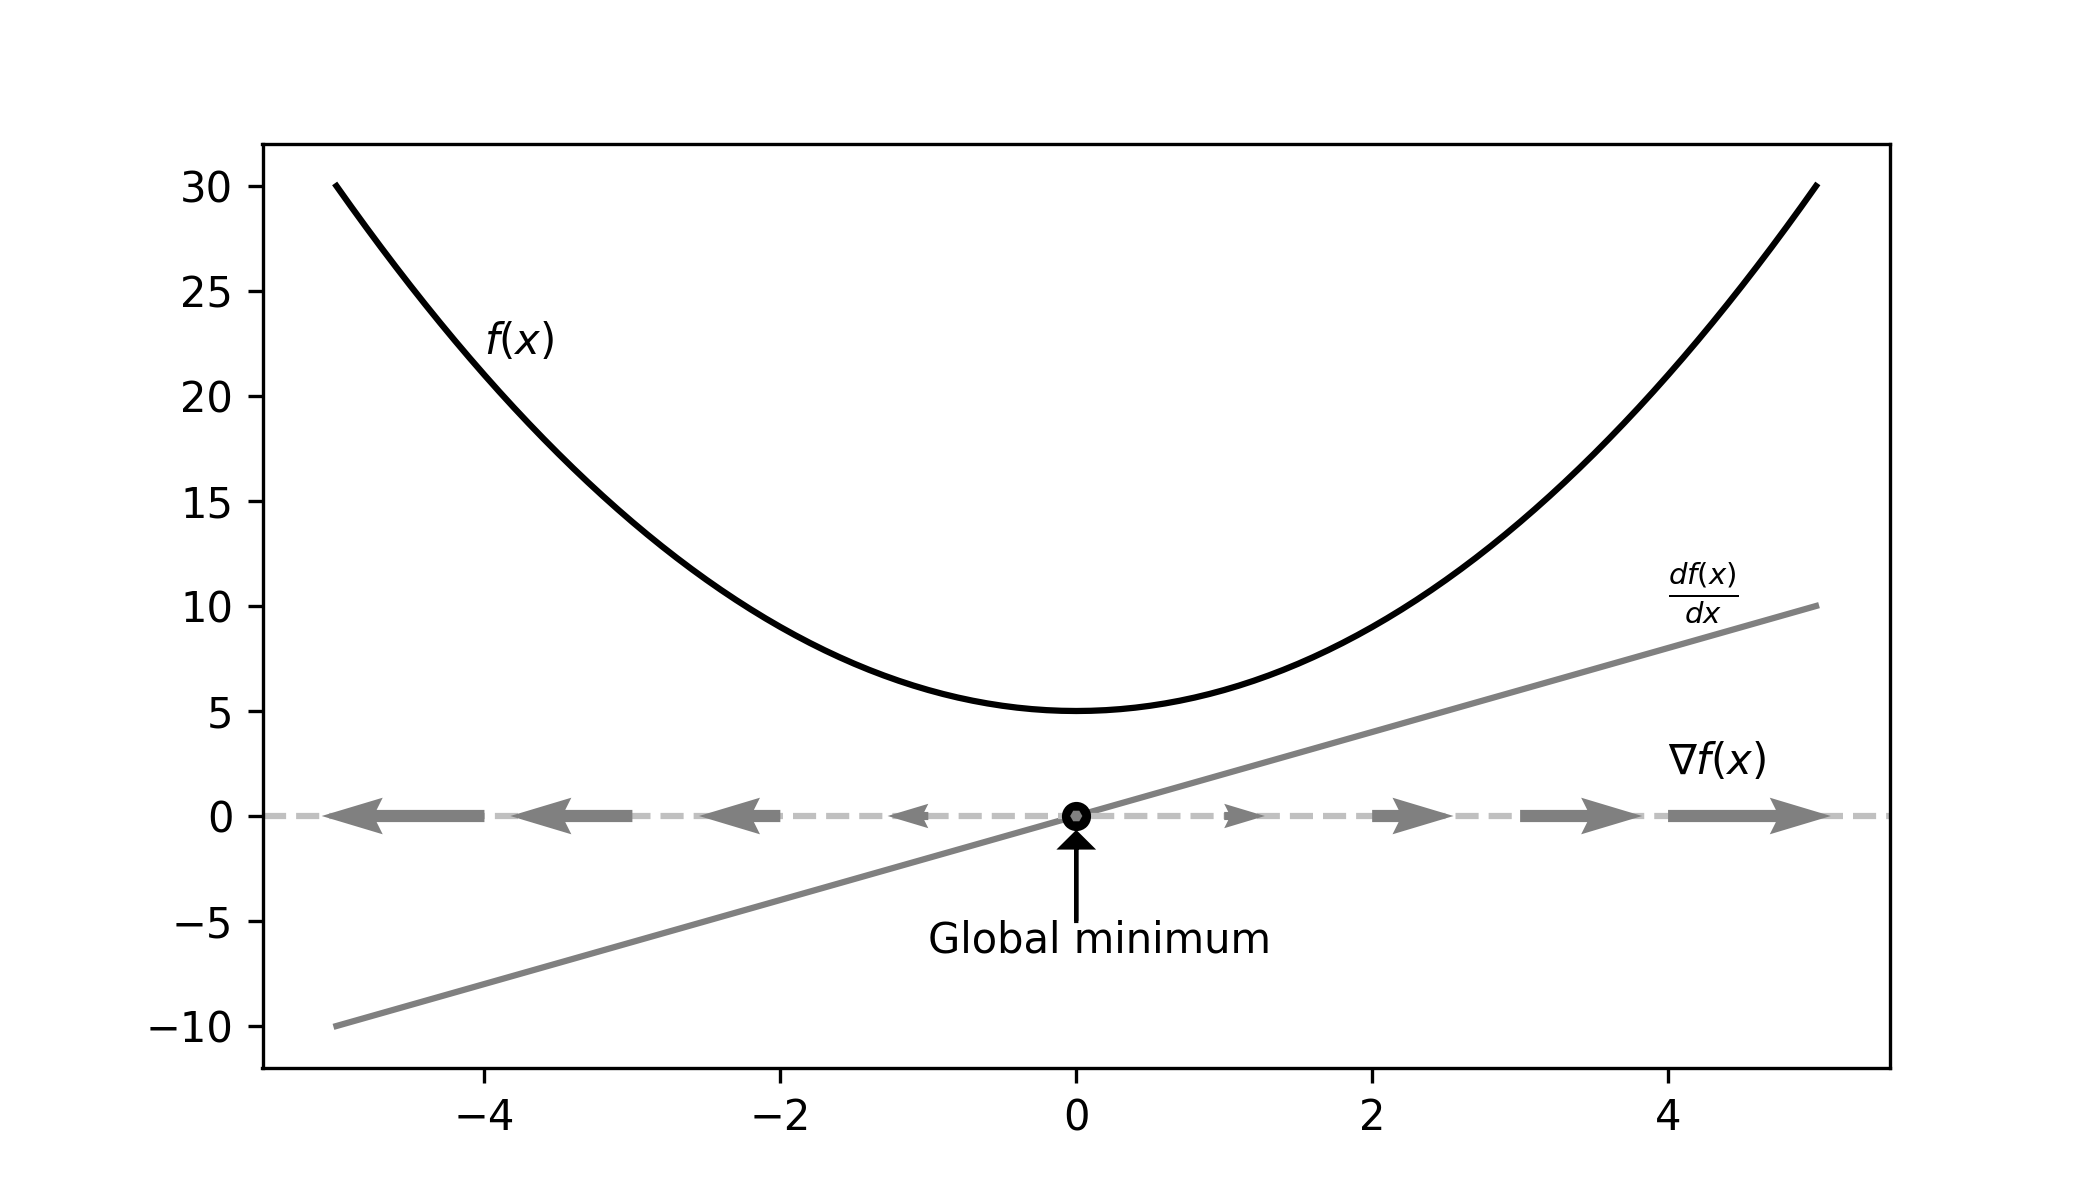 The analytical global minimum with the gradient